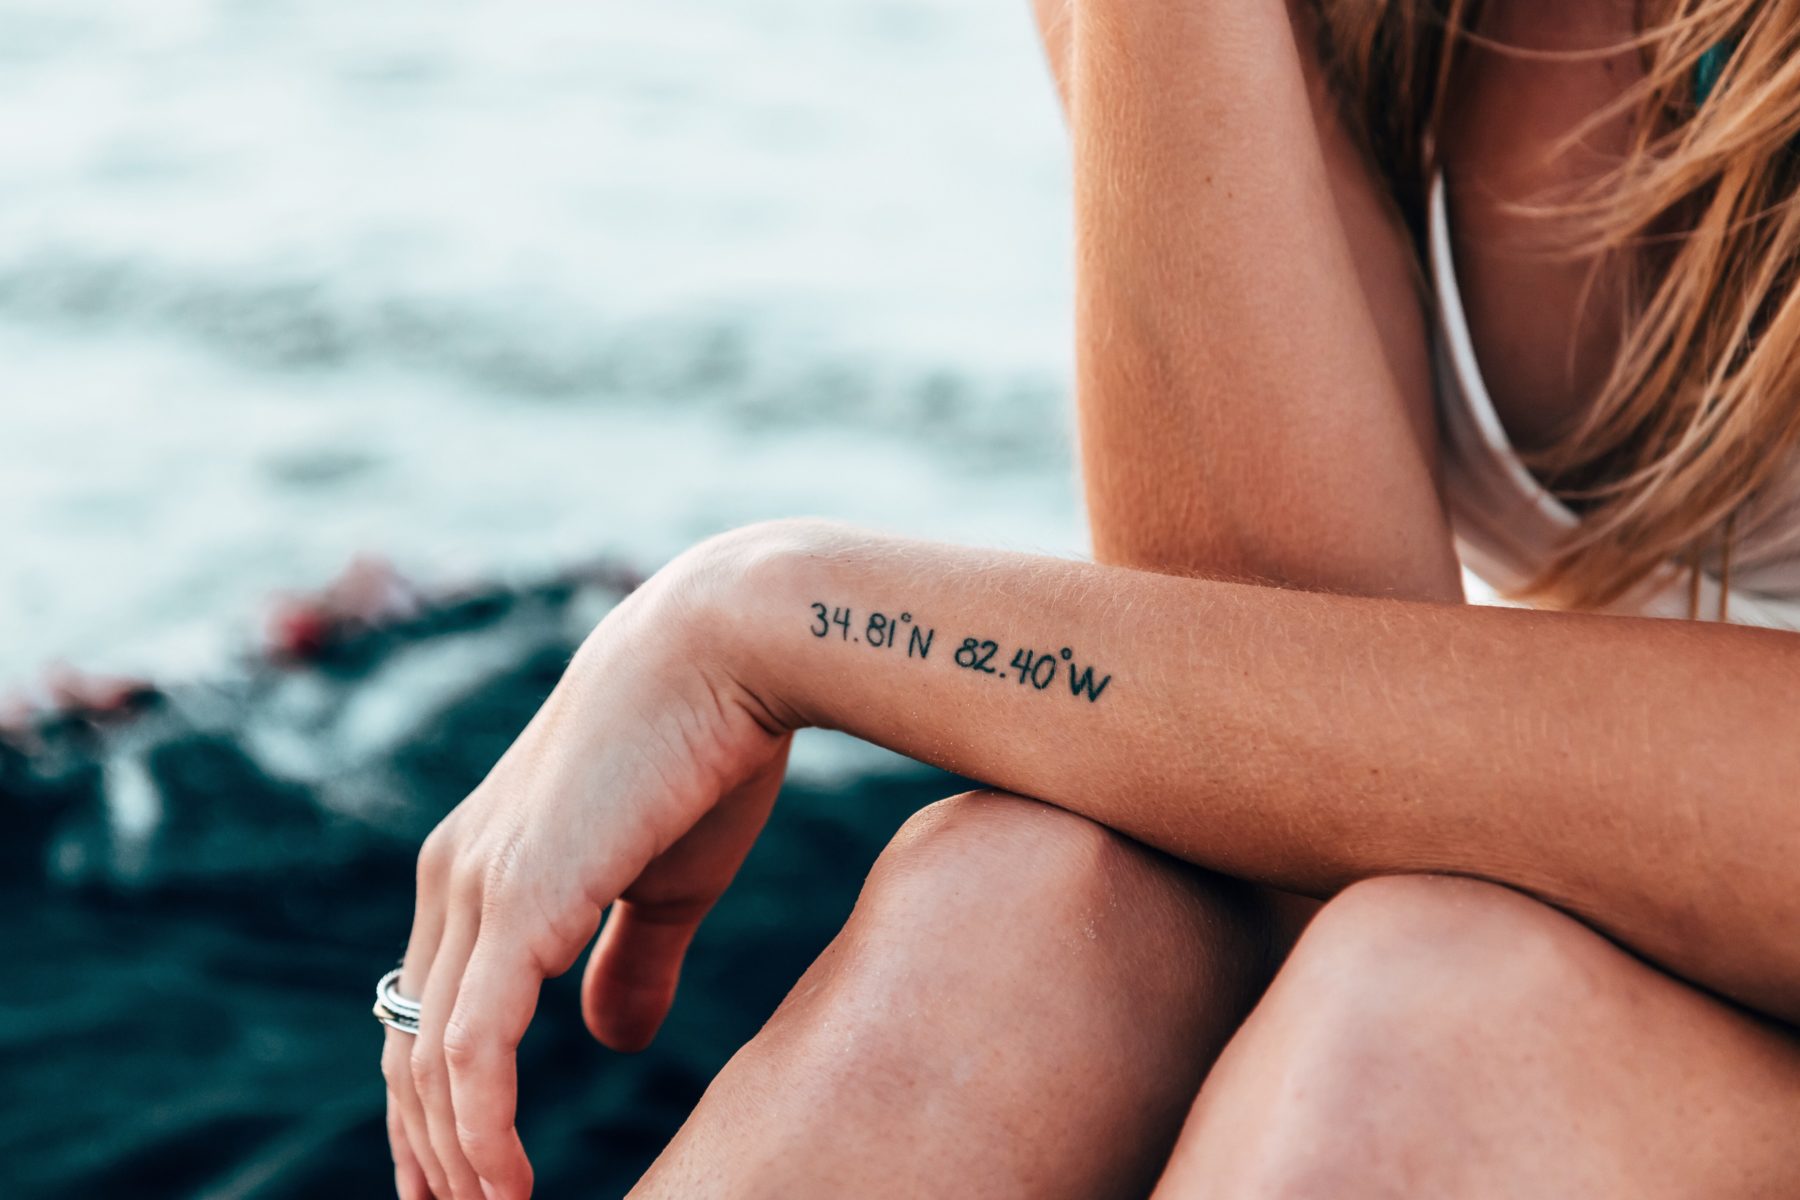 A girl with coordinates tattooed on her forearm.